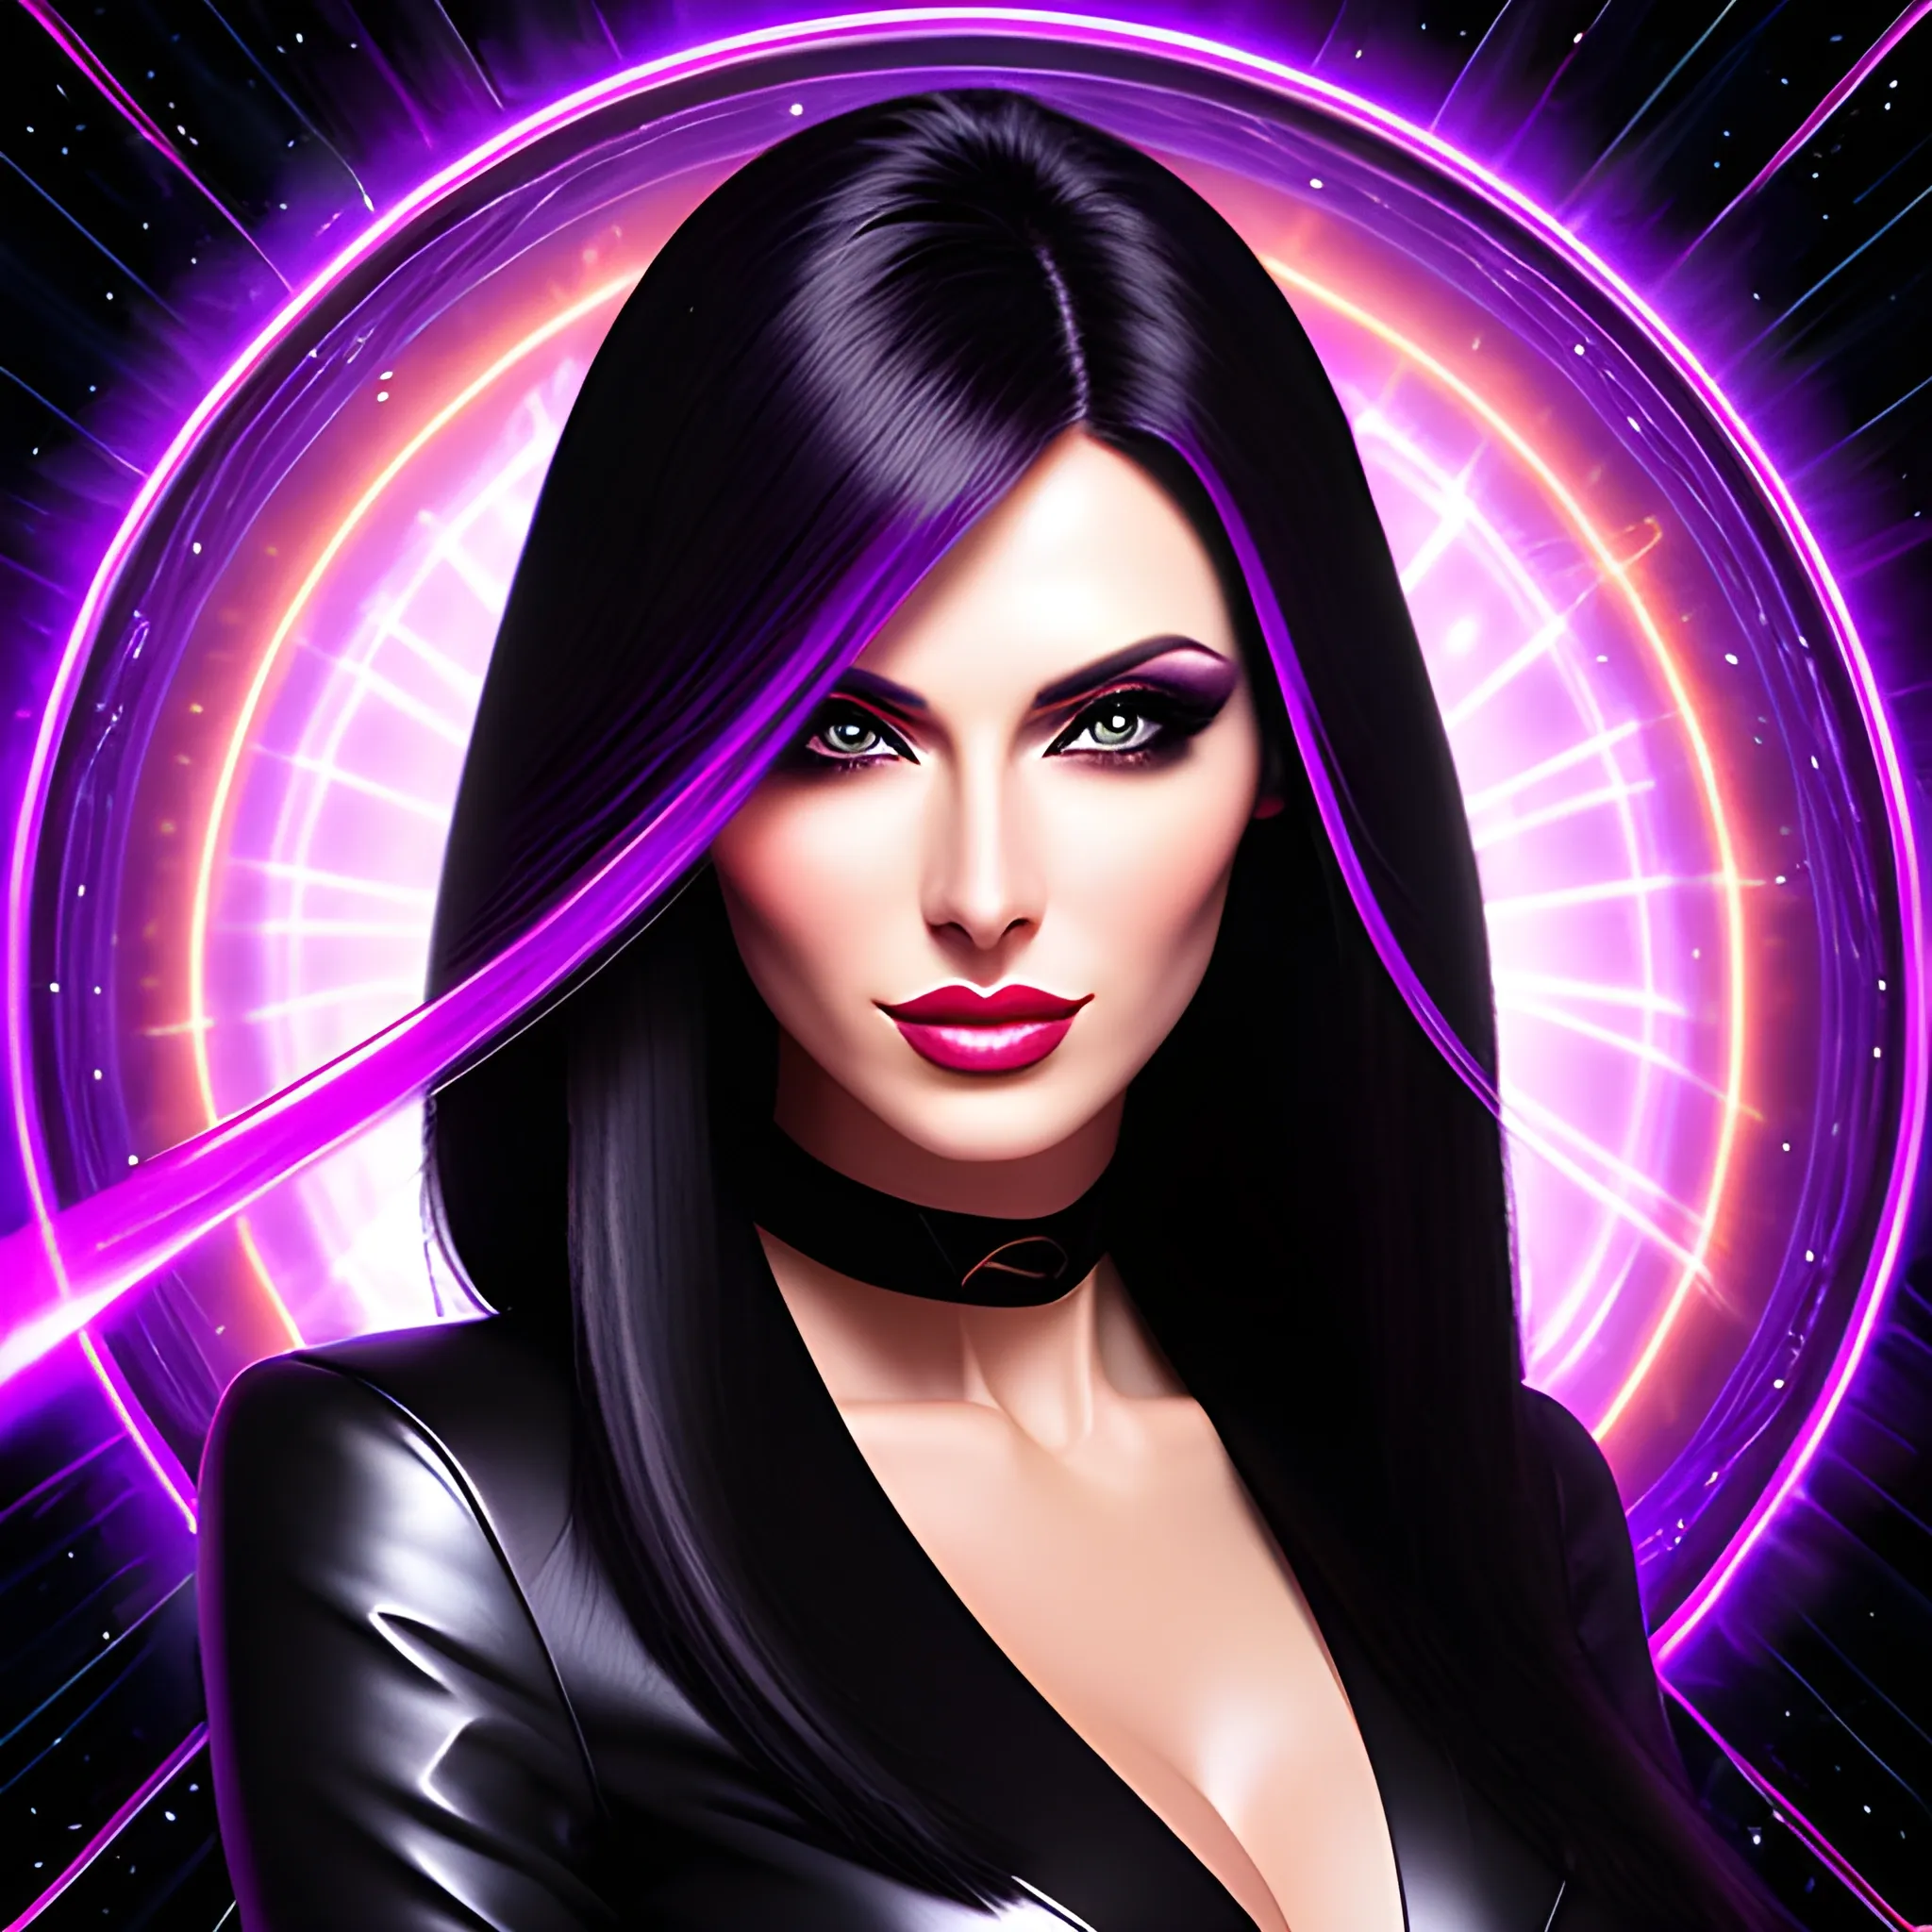 Beautiful girl with side-swept dark straight hair, luxury makeup, luxurious clothing, HD, backdrop, technology, symmetry, revolve, light trail, effect, element, black purple, science, pattern, ray, composition, fractal, bright, background, space, energy, shine, whirl, glow, computer graphics, light, abstract, swirl
